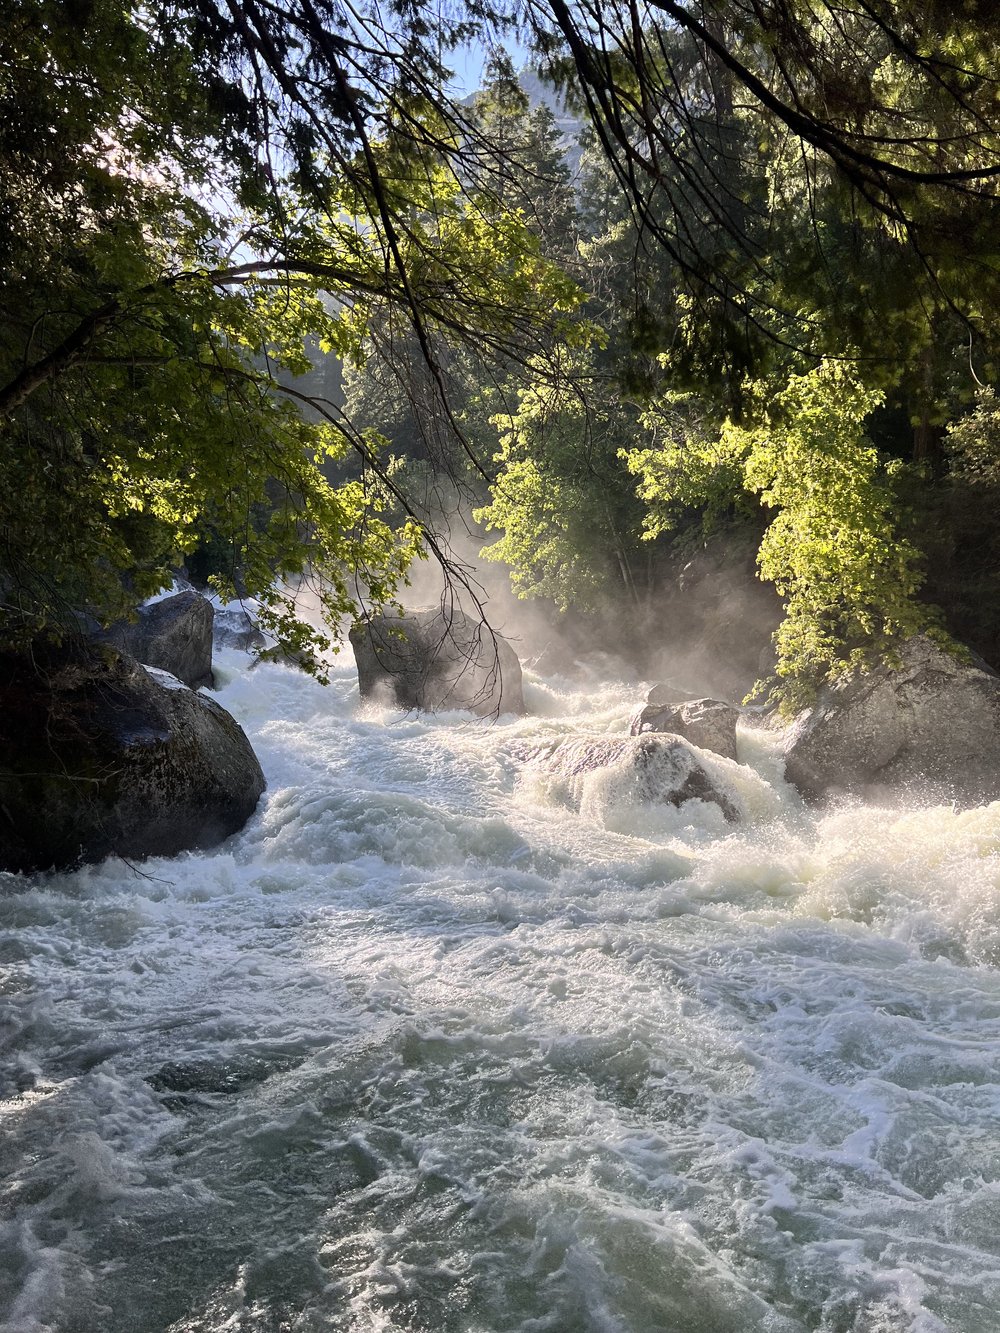  Water crashing against rocks with trees above and the sun shining from the left 